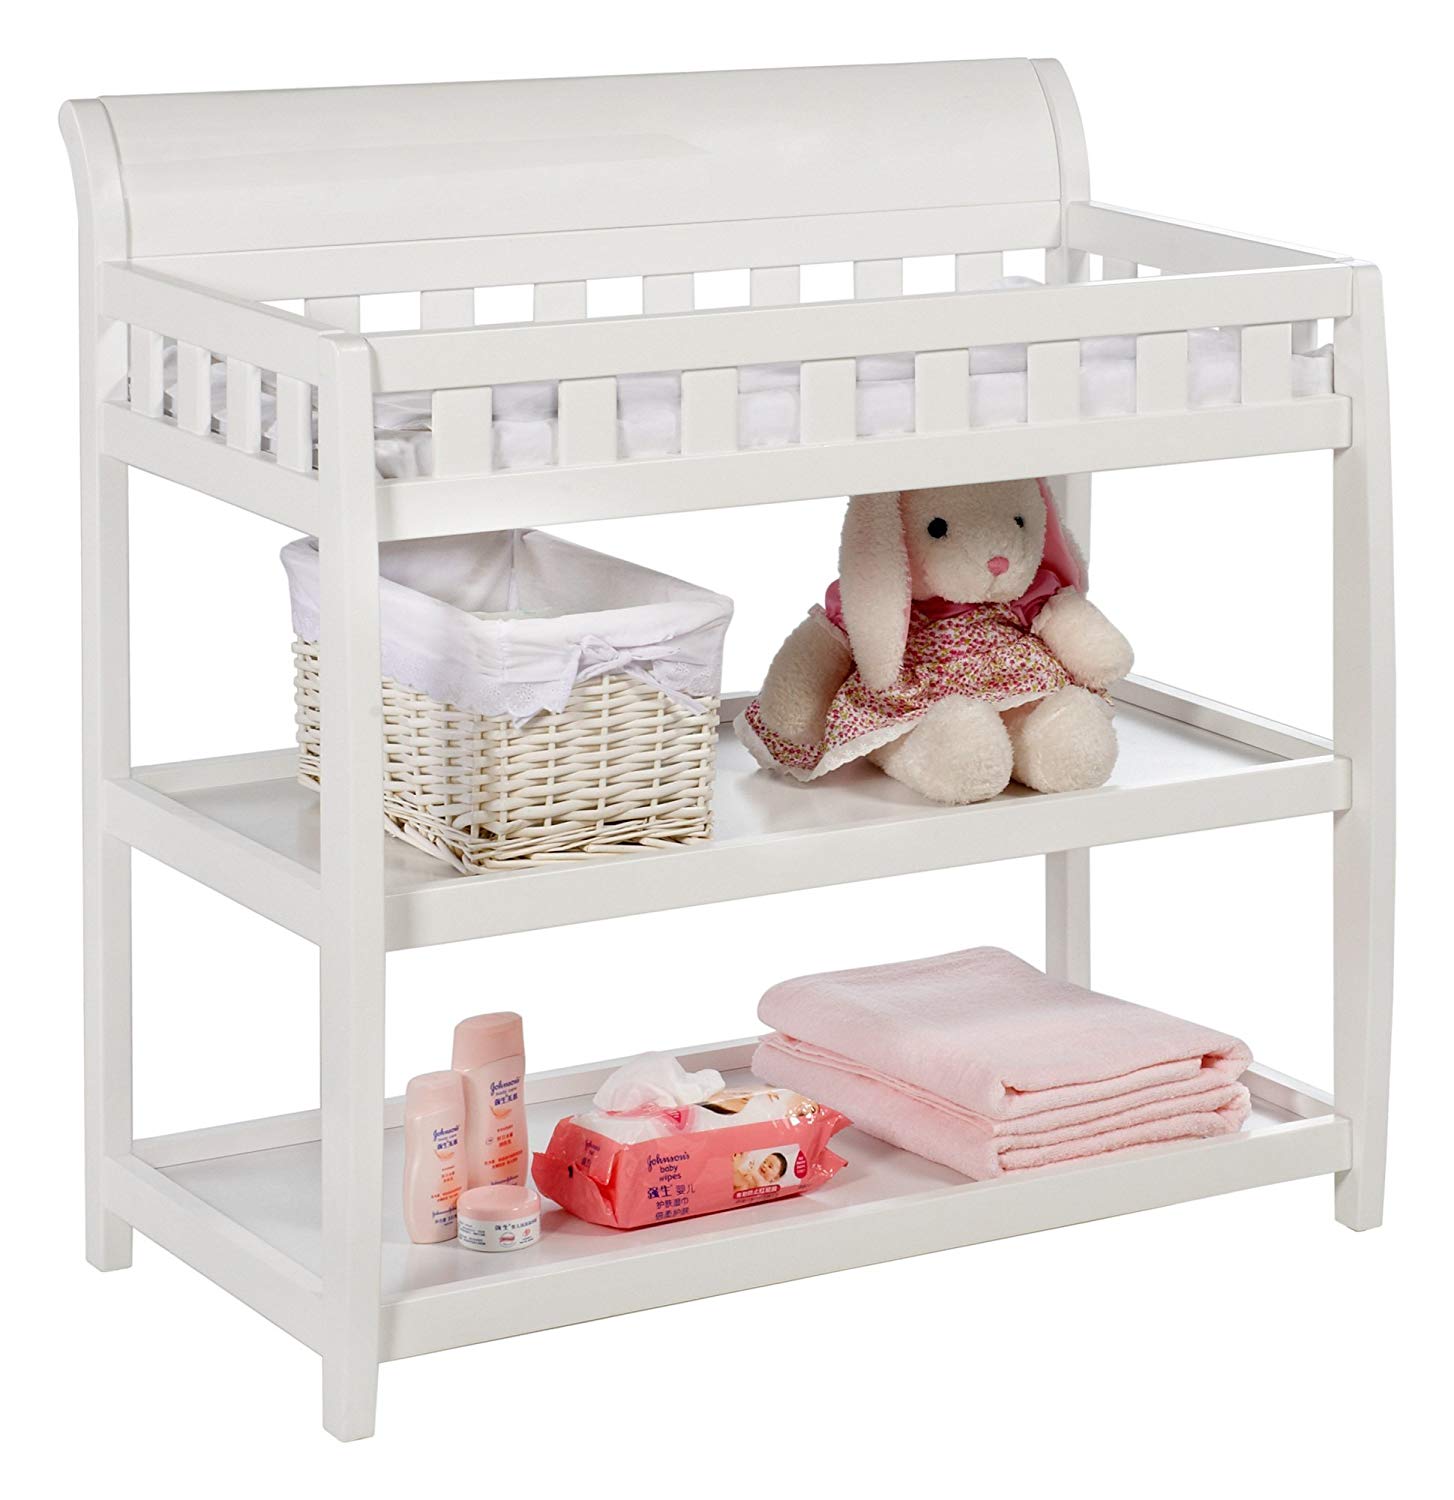 Changing Table for Baby